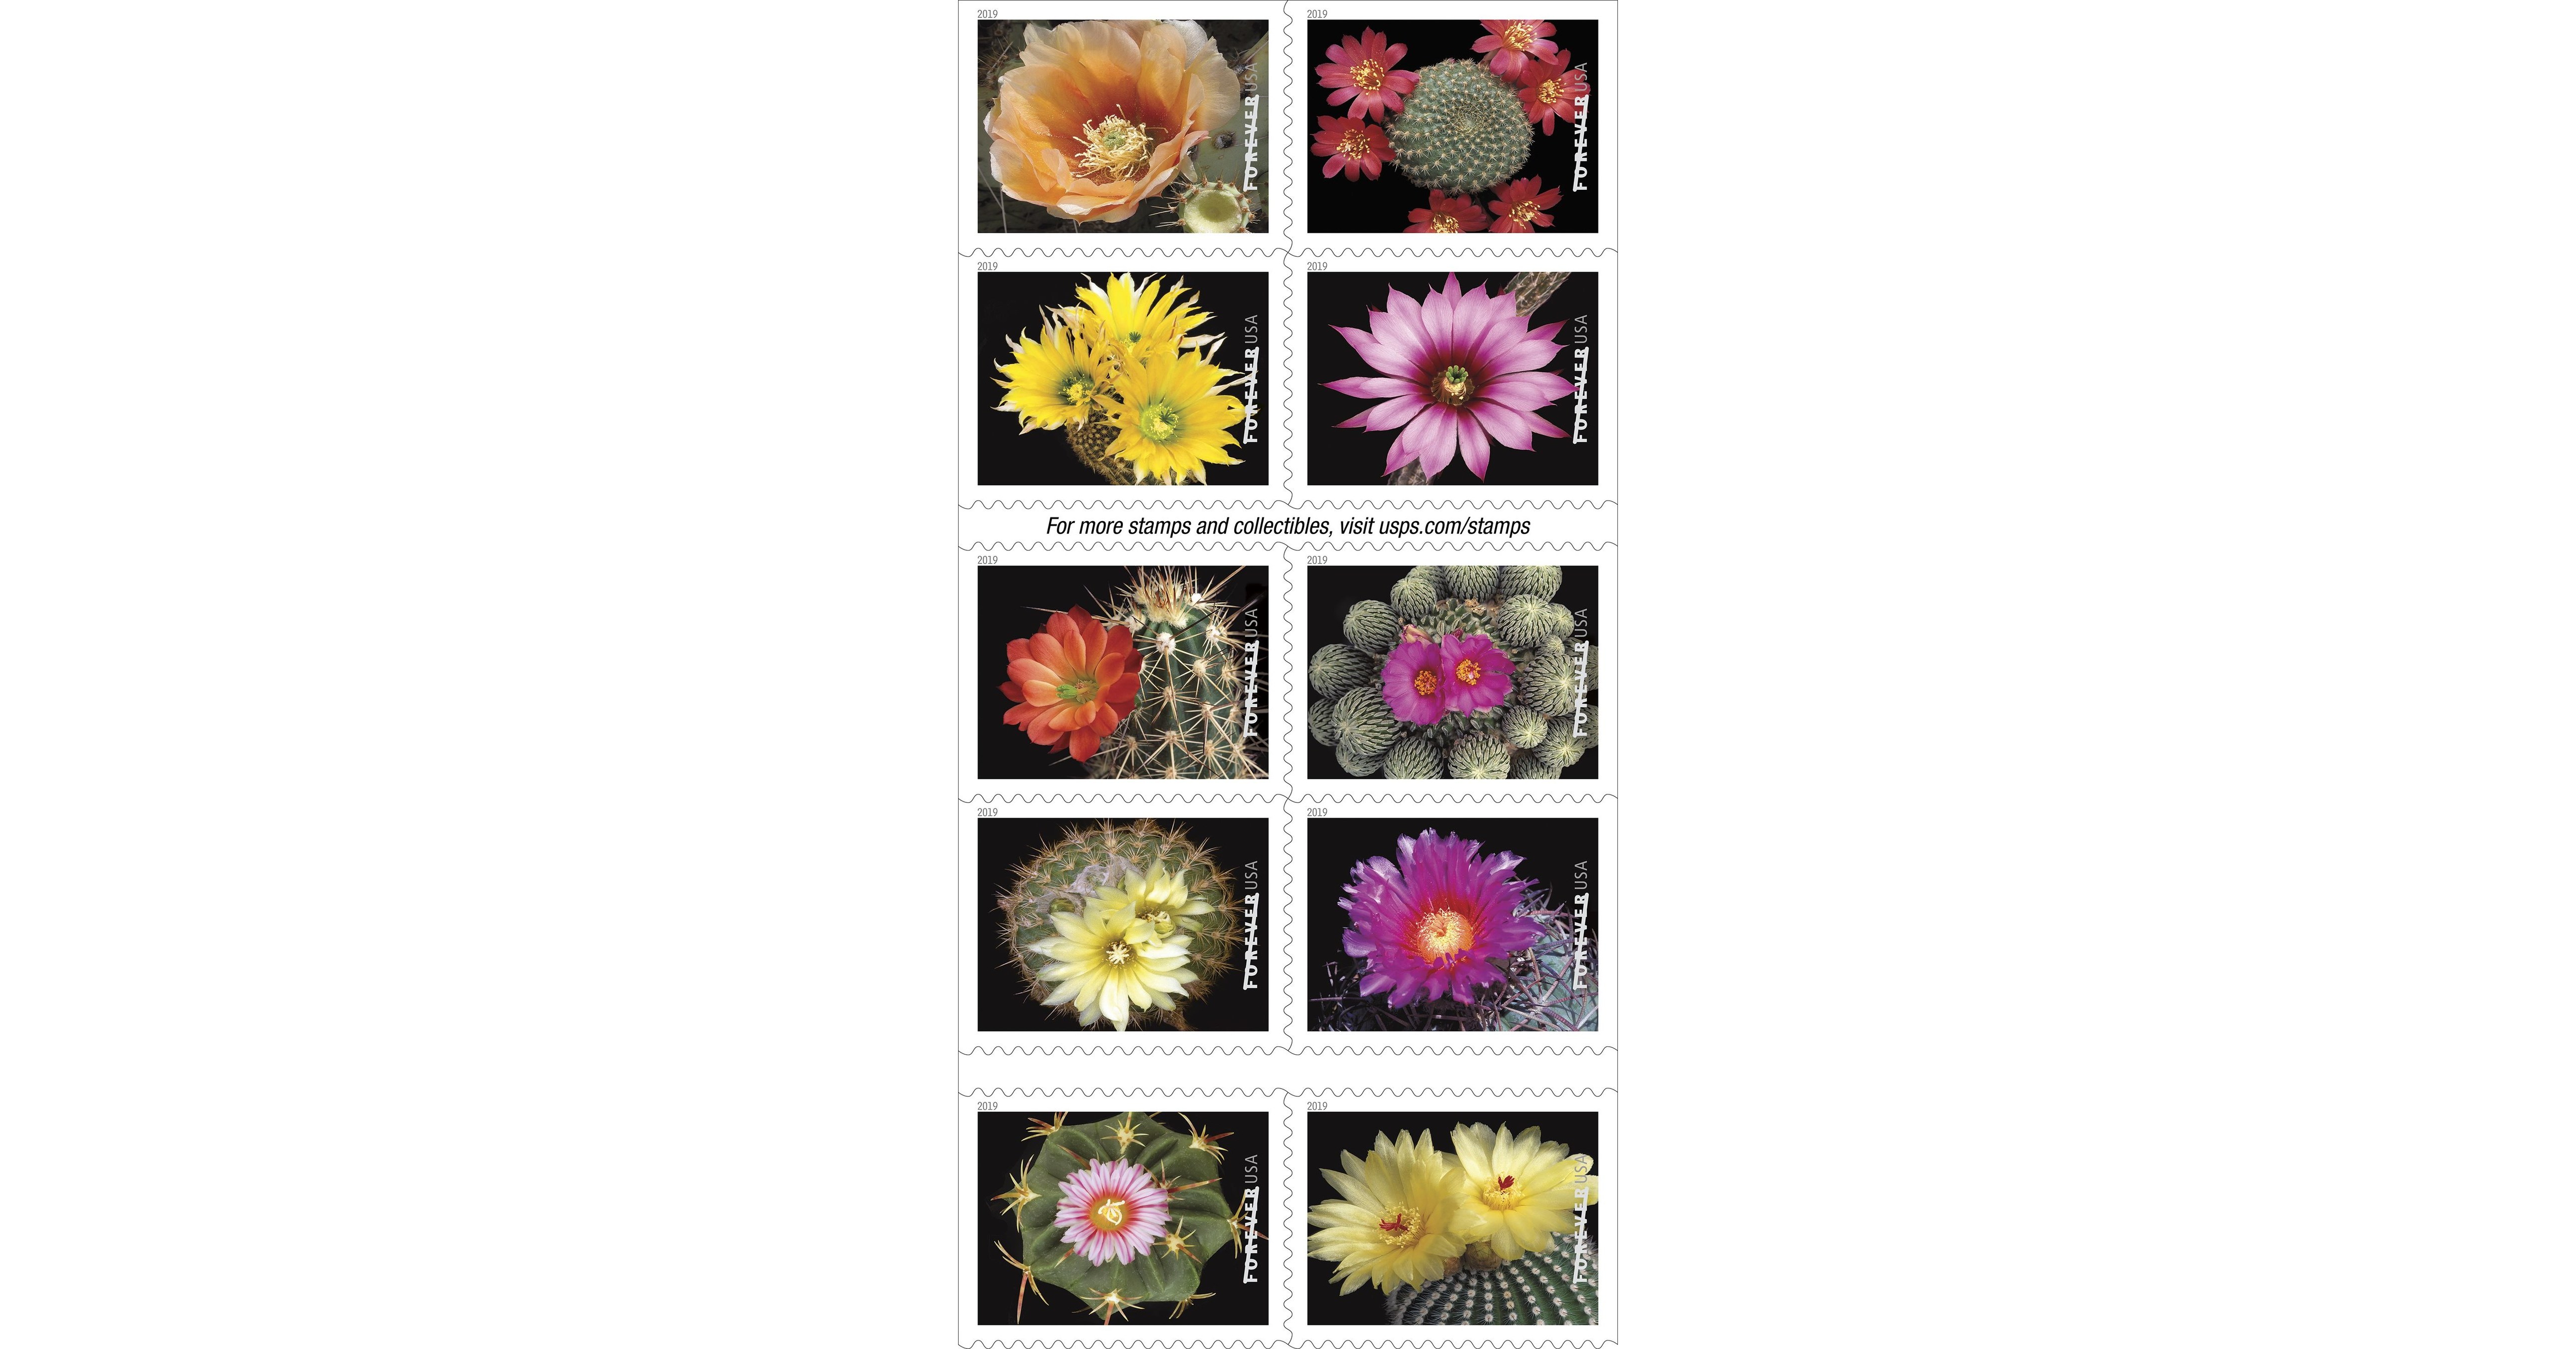 USPS releases Cactus Flowers Forever stamps - Newsroom - About